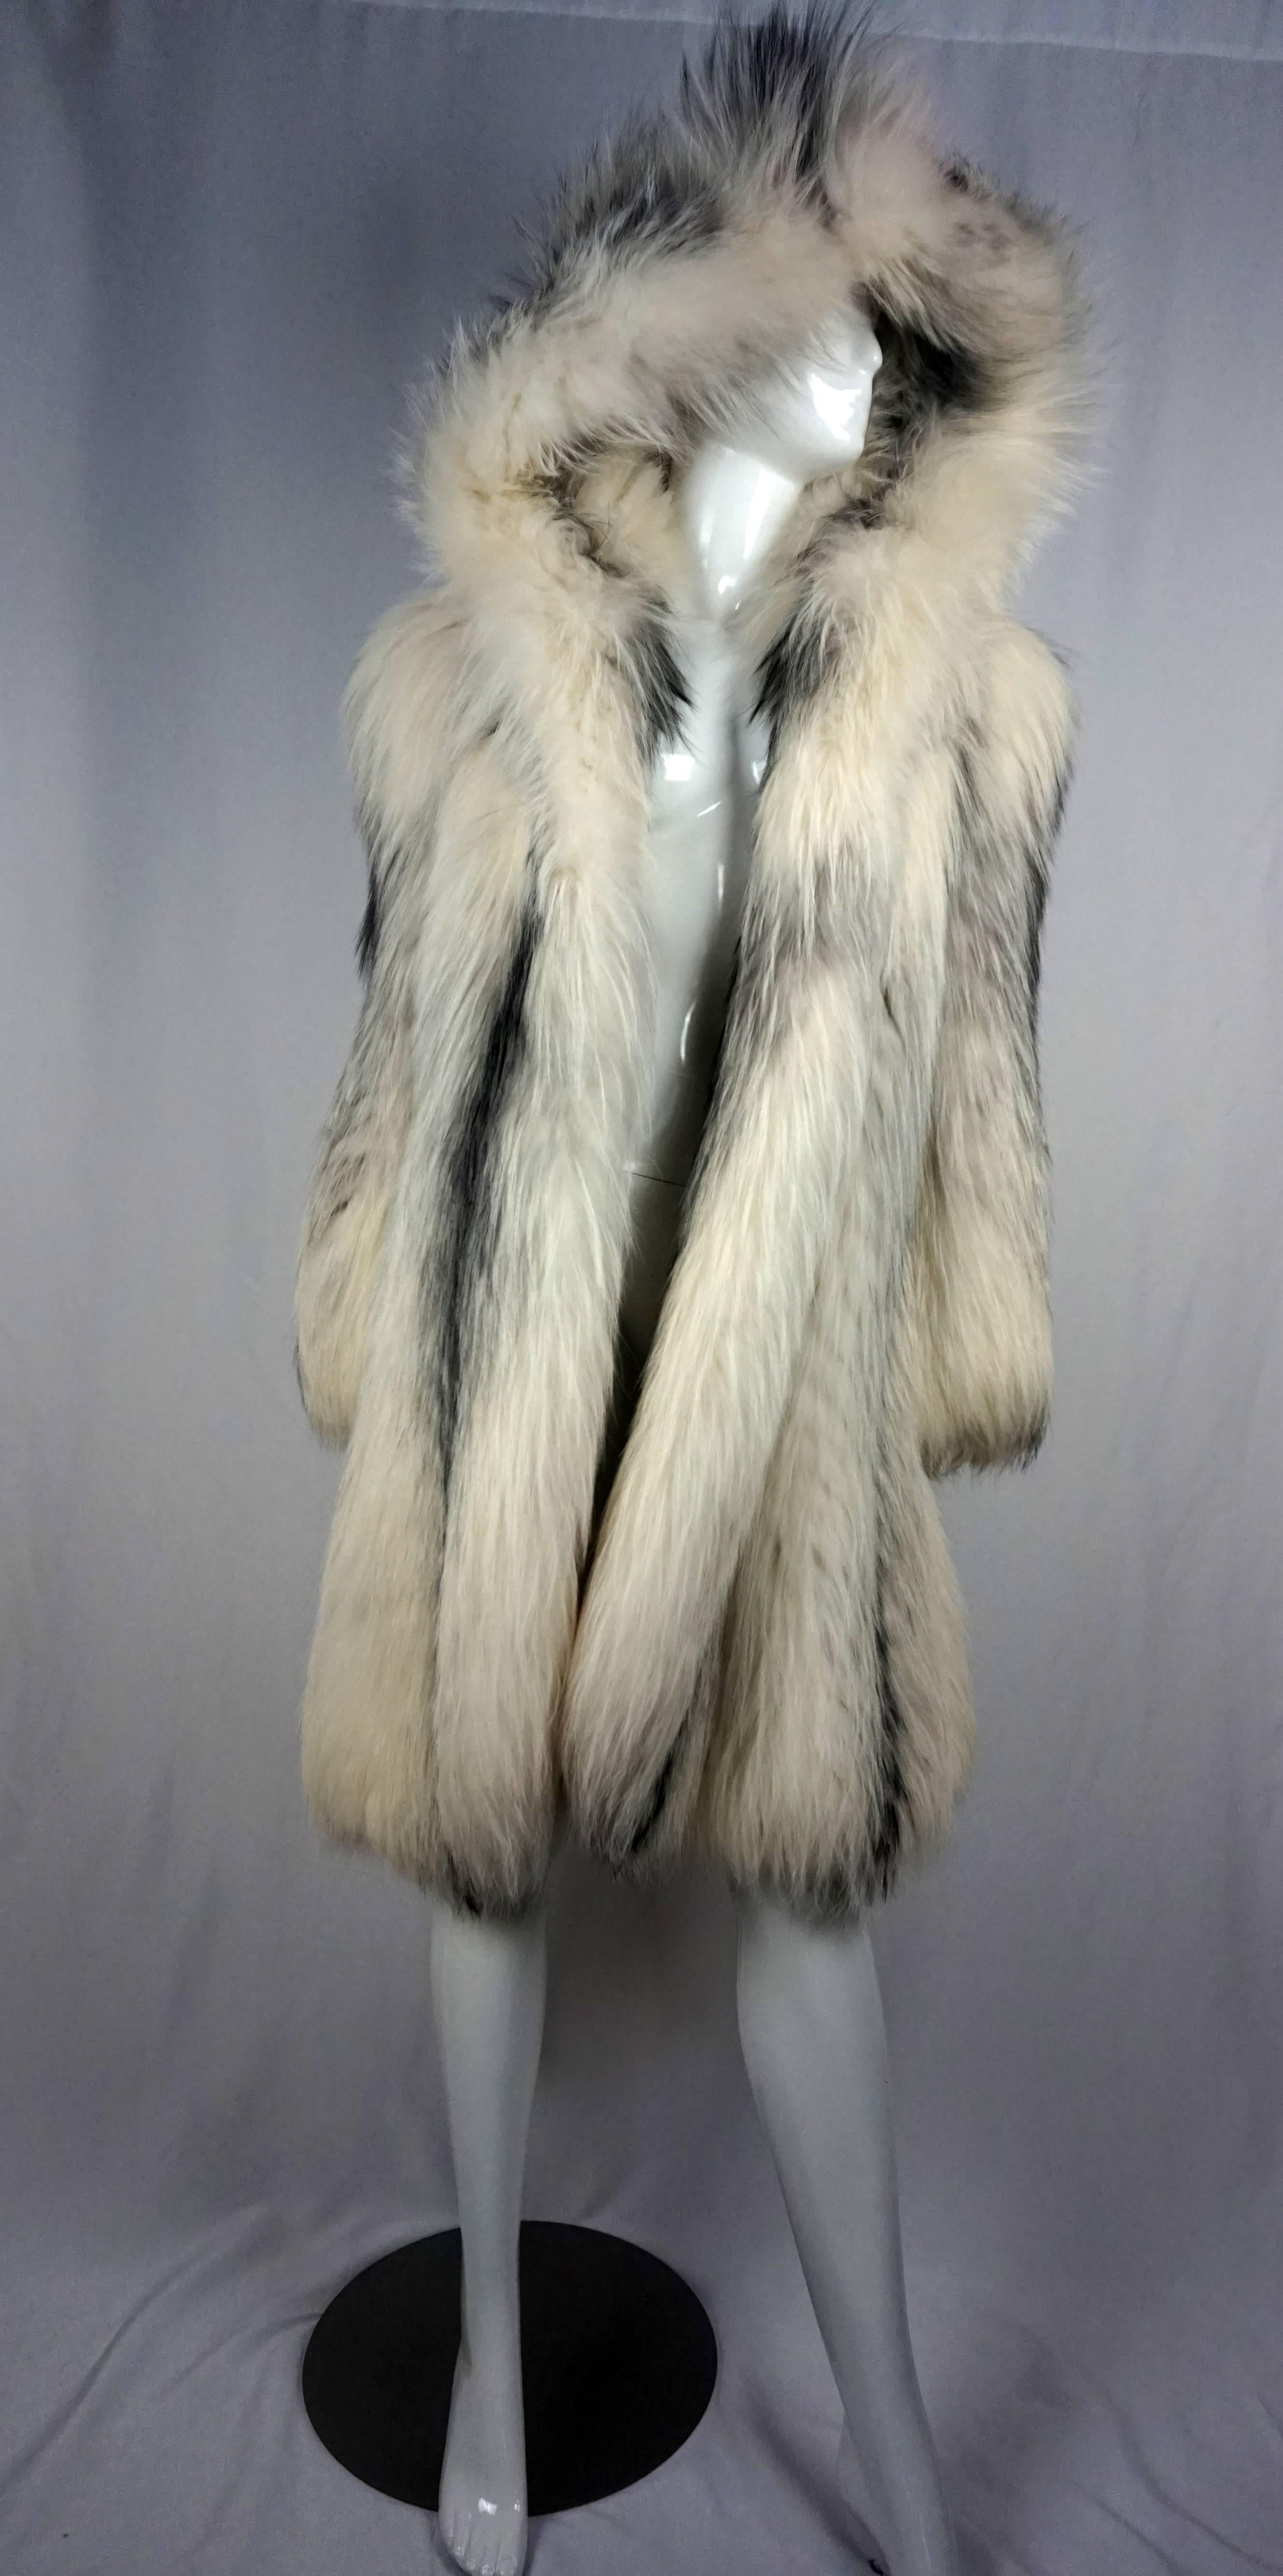 This lush and gorgeous silver fox fur is true piece that denotes luxury at its best.

This piece is oversized with a hood that adds an extra element of drama and fashion and has a simplistic leather belt which adds to a 1980s does 40s